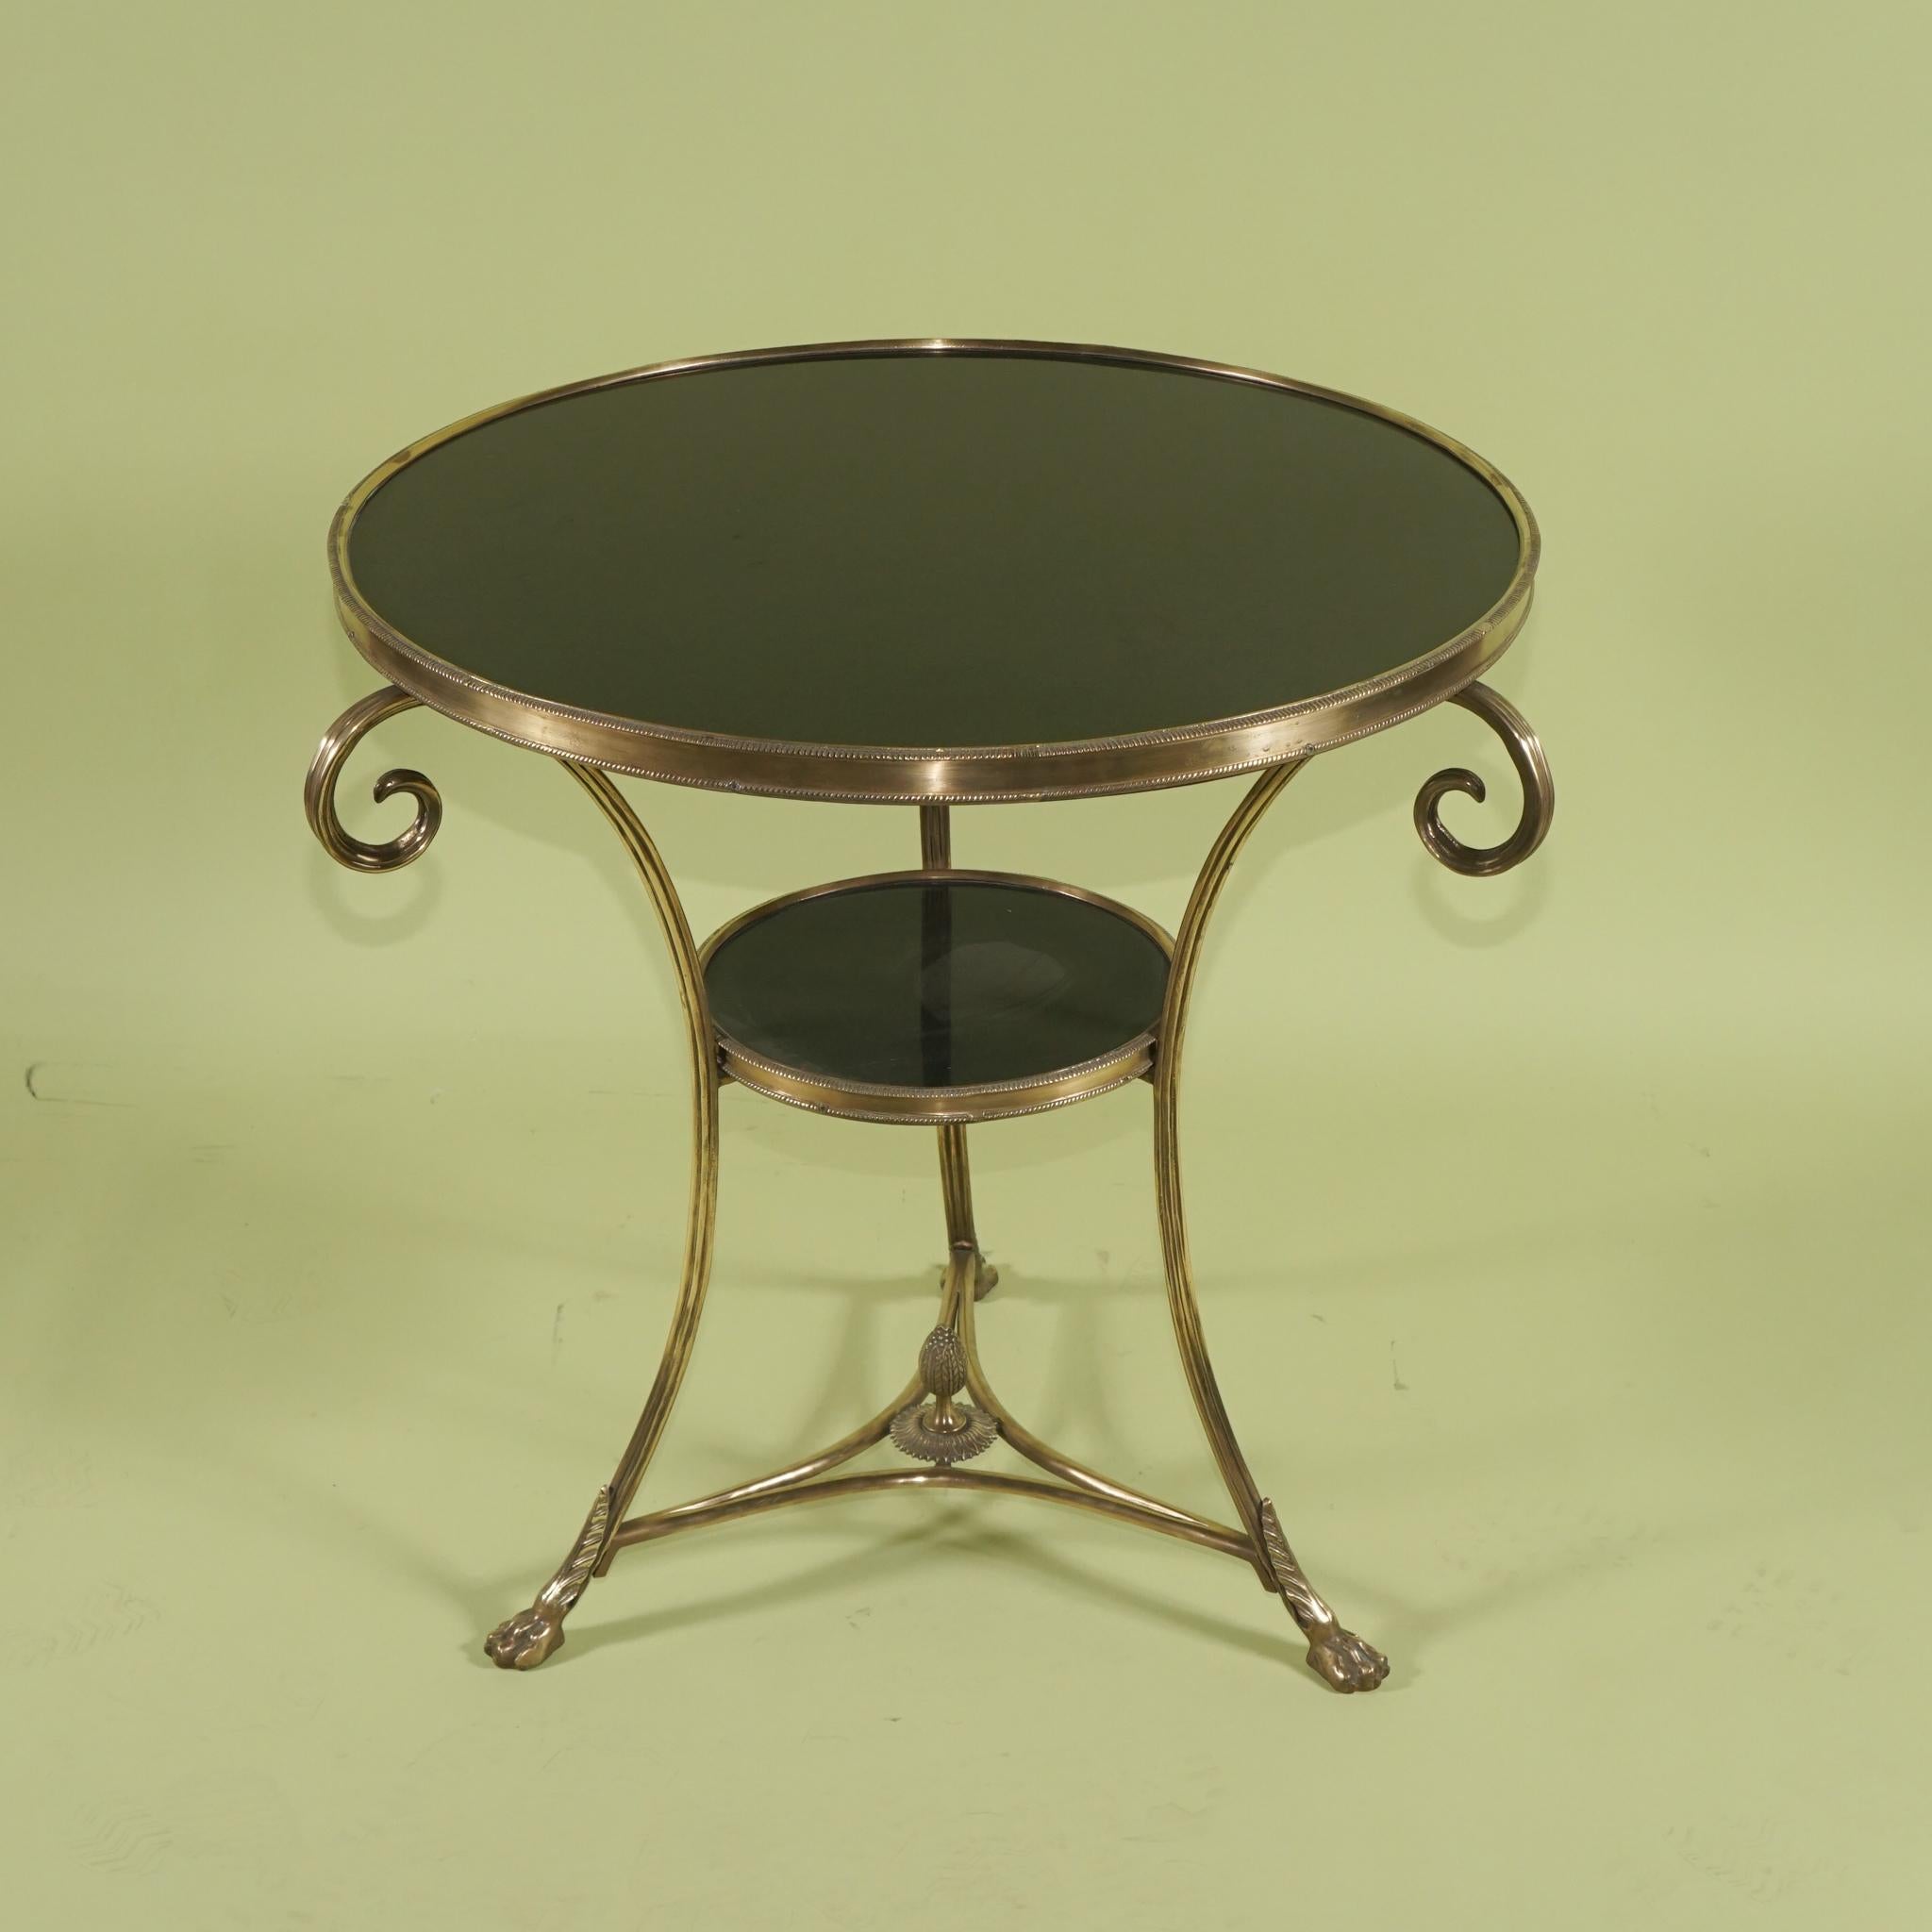 Gilt Polished Bronze 20th Century Gueridon with Black Marble Top & Shelf